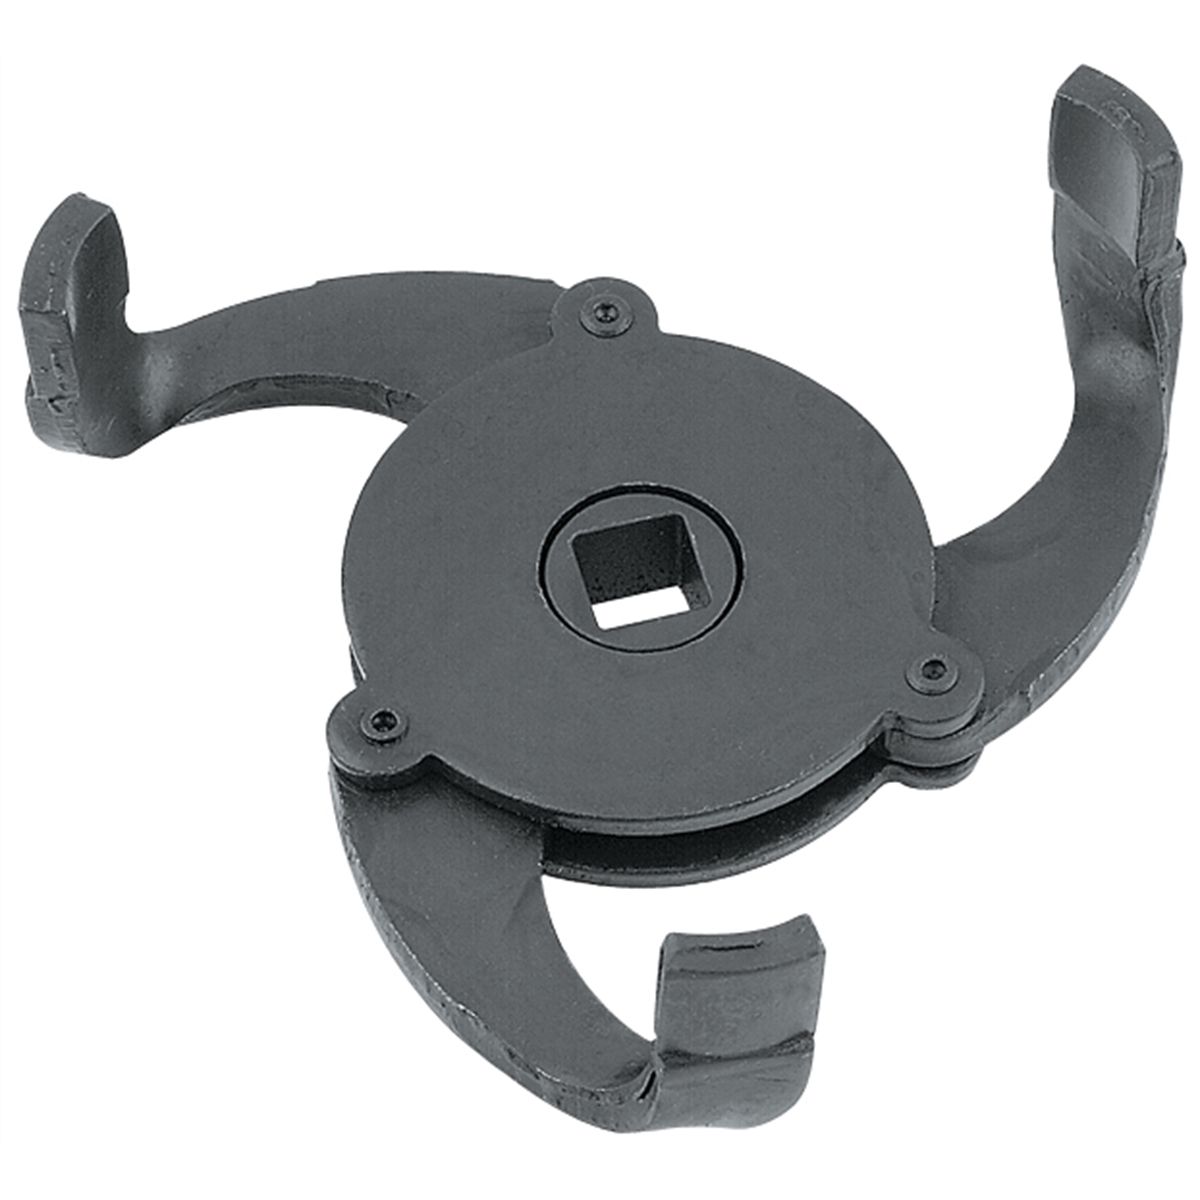 Universal 3-Jaw Oil Filter Wrench 2-1/2 to 3-3/4 I...